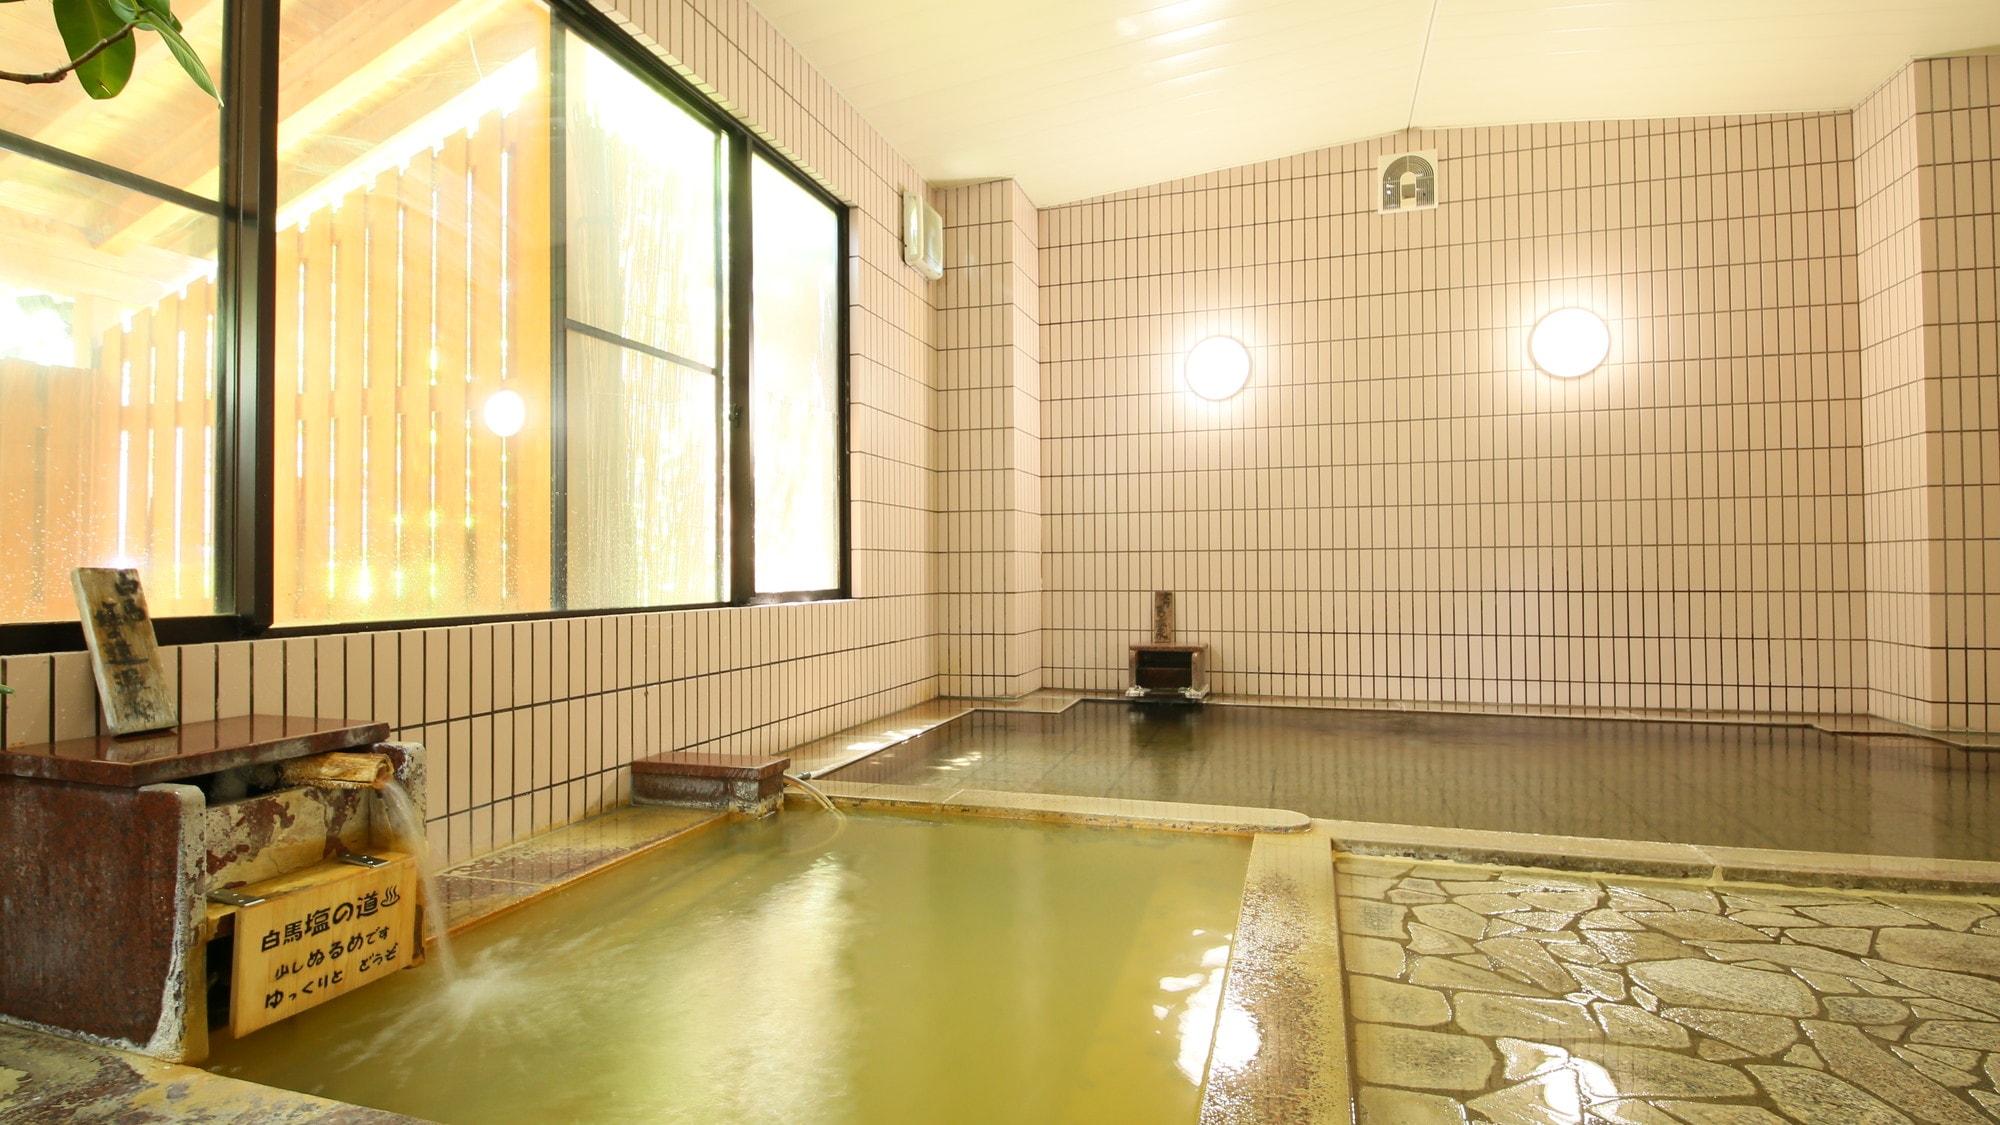 The back is "Omachi Kuzu Onsen" and the front is "Yume no Yu Original Hot Spring". You can enjoy two hot springs!